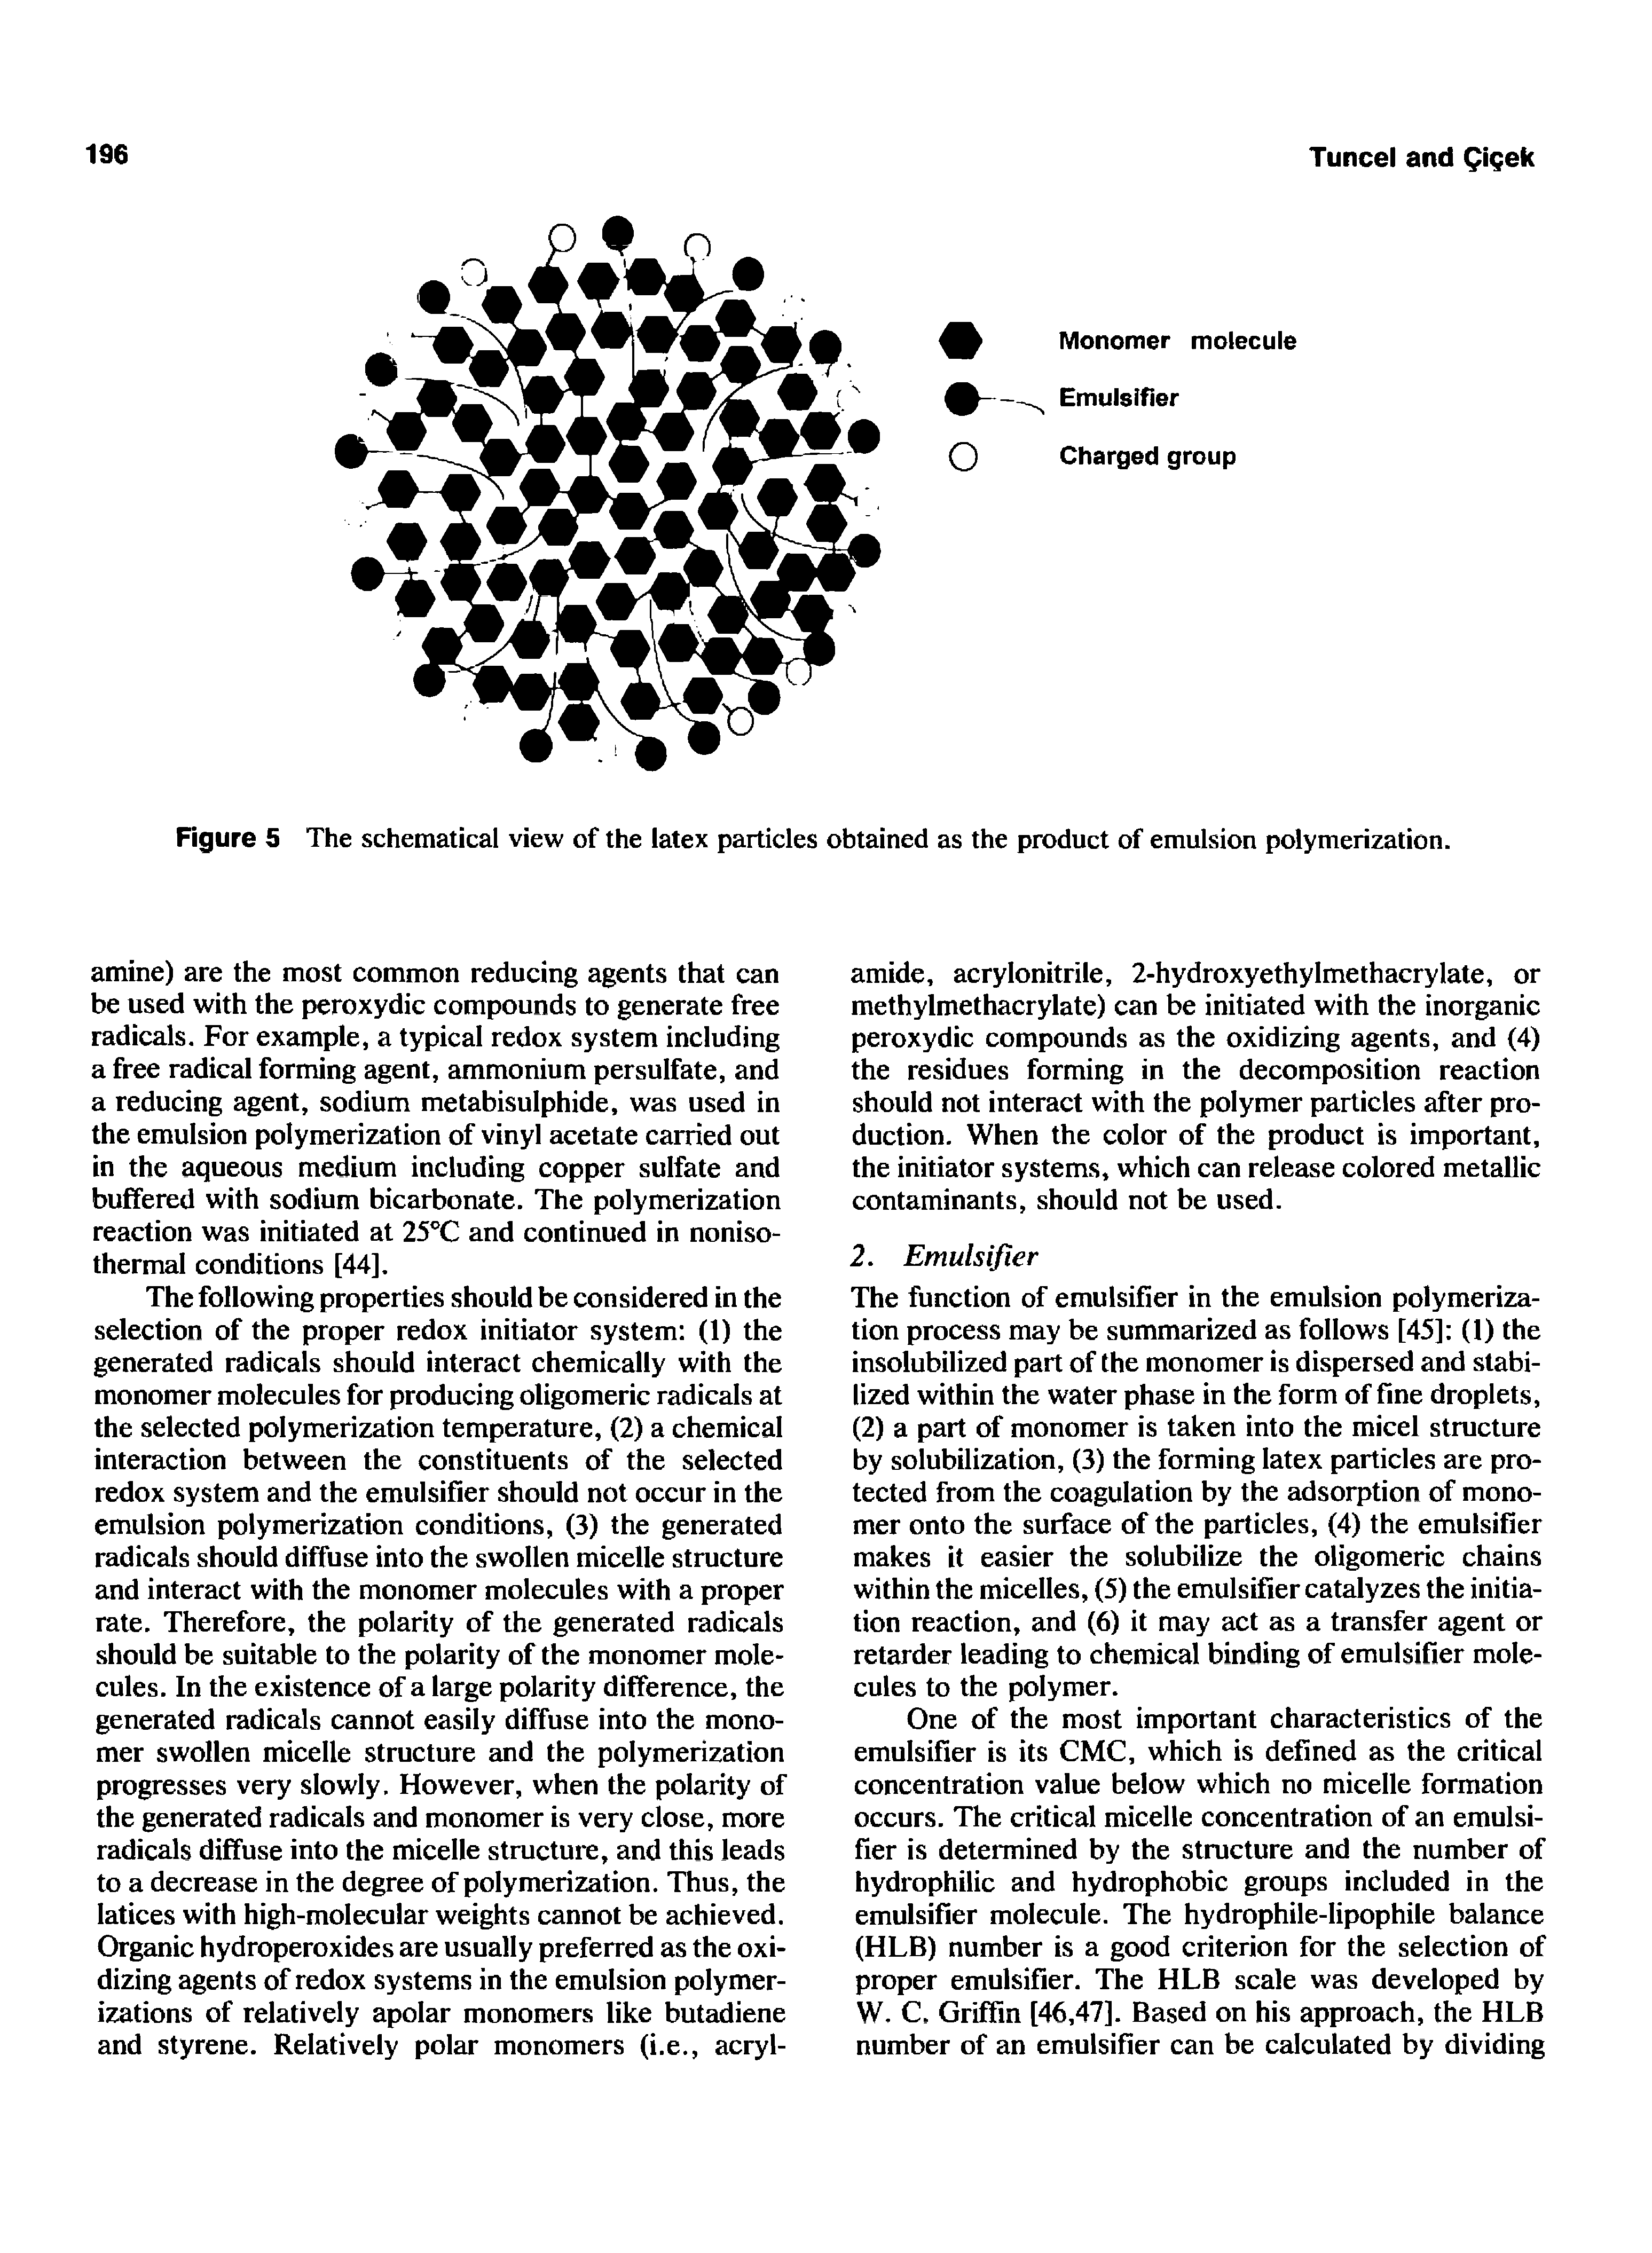 Figure 5 The schematical view of the latex particles obtained as the product of emulsion polymerization.